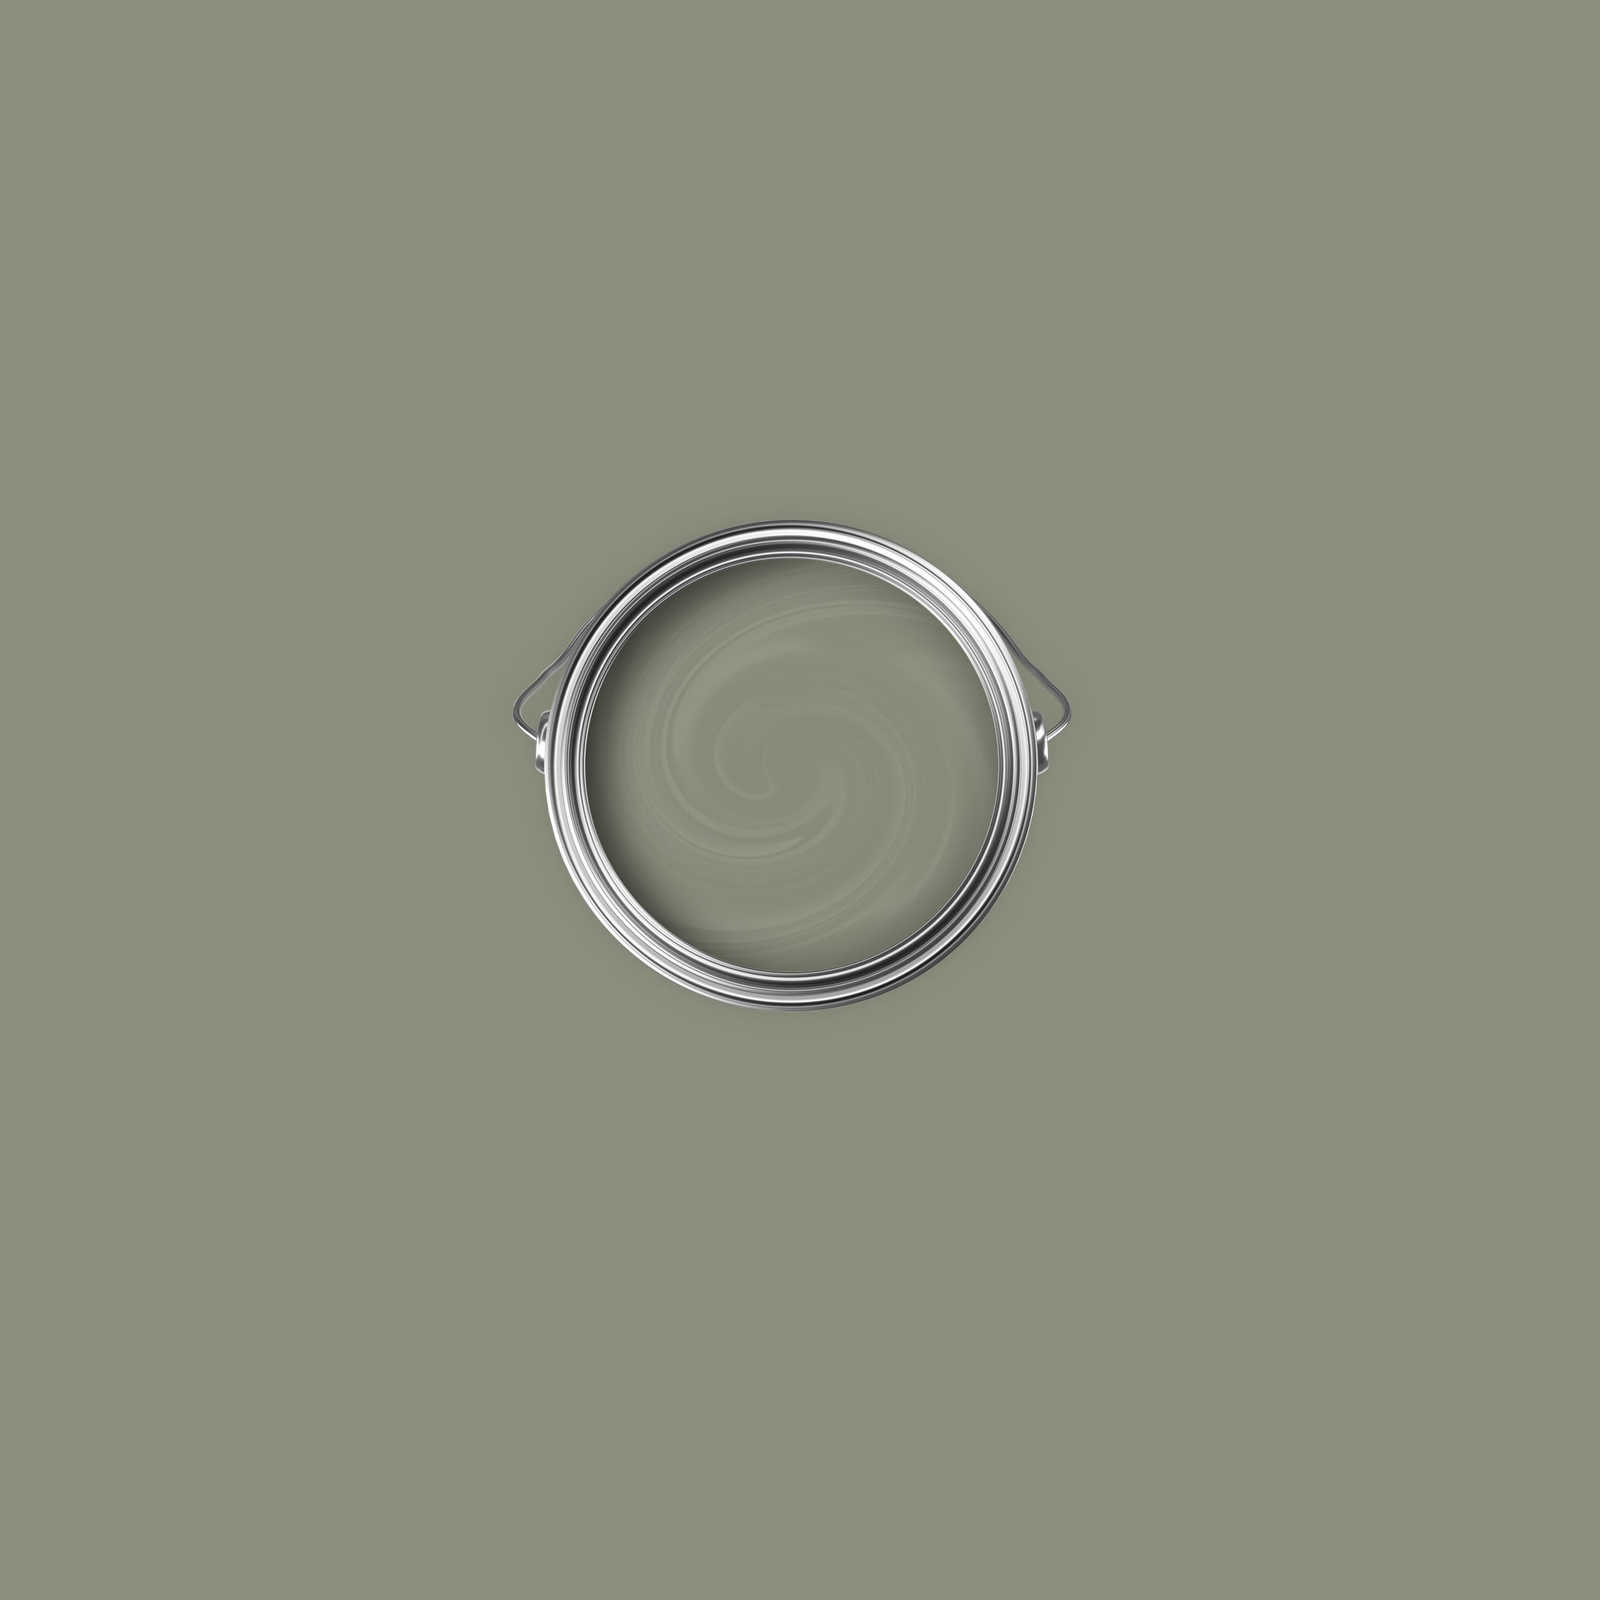             Premium Wall Paint Persuasive Olive Green »Talented calm taupe« NW706 – 1 litre
        